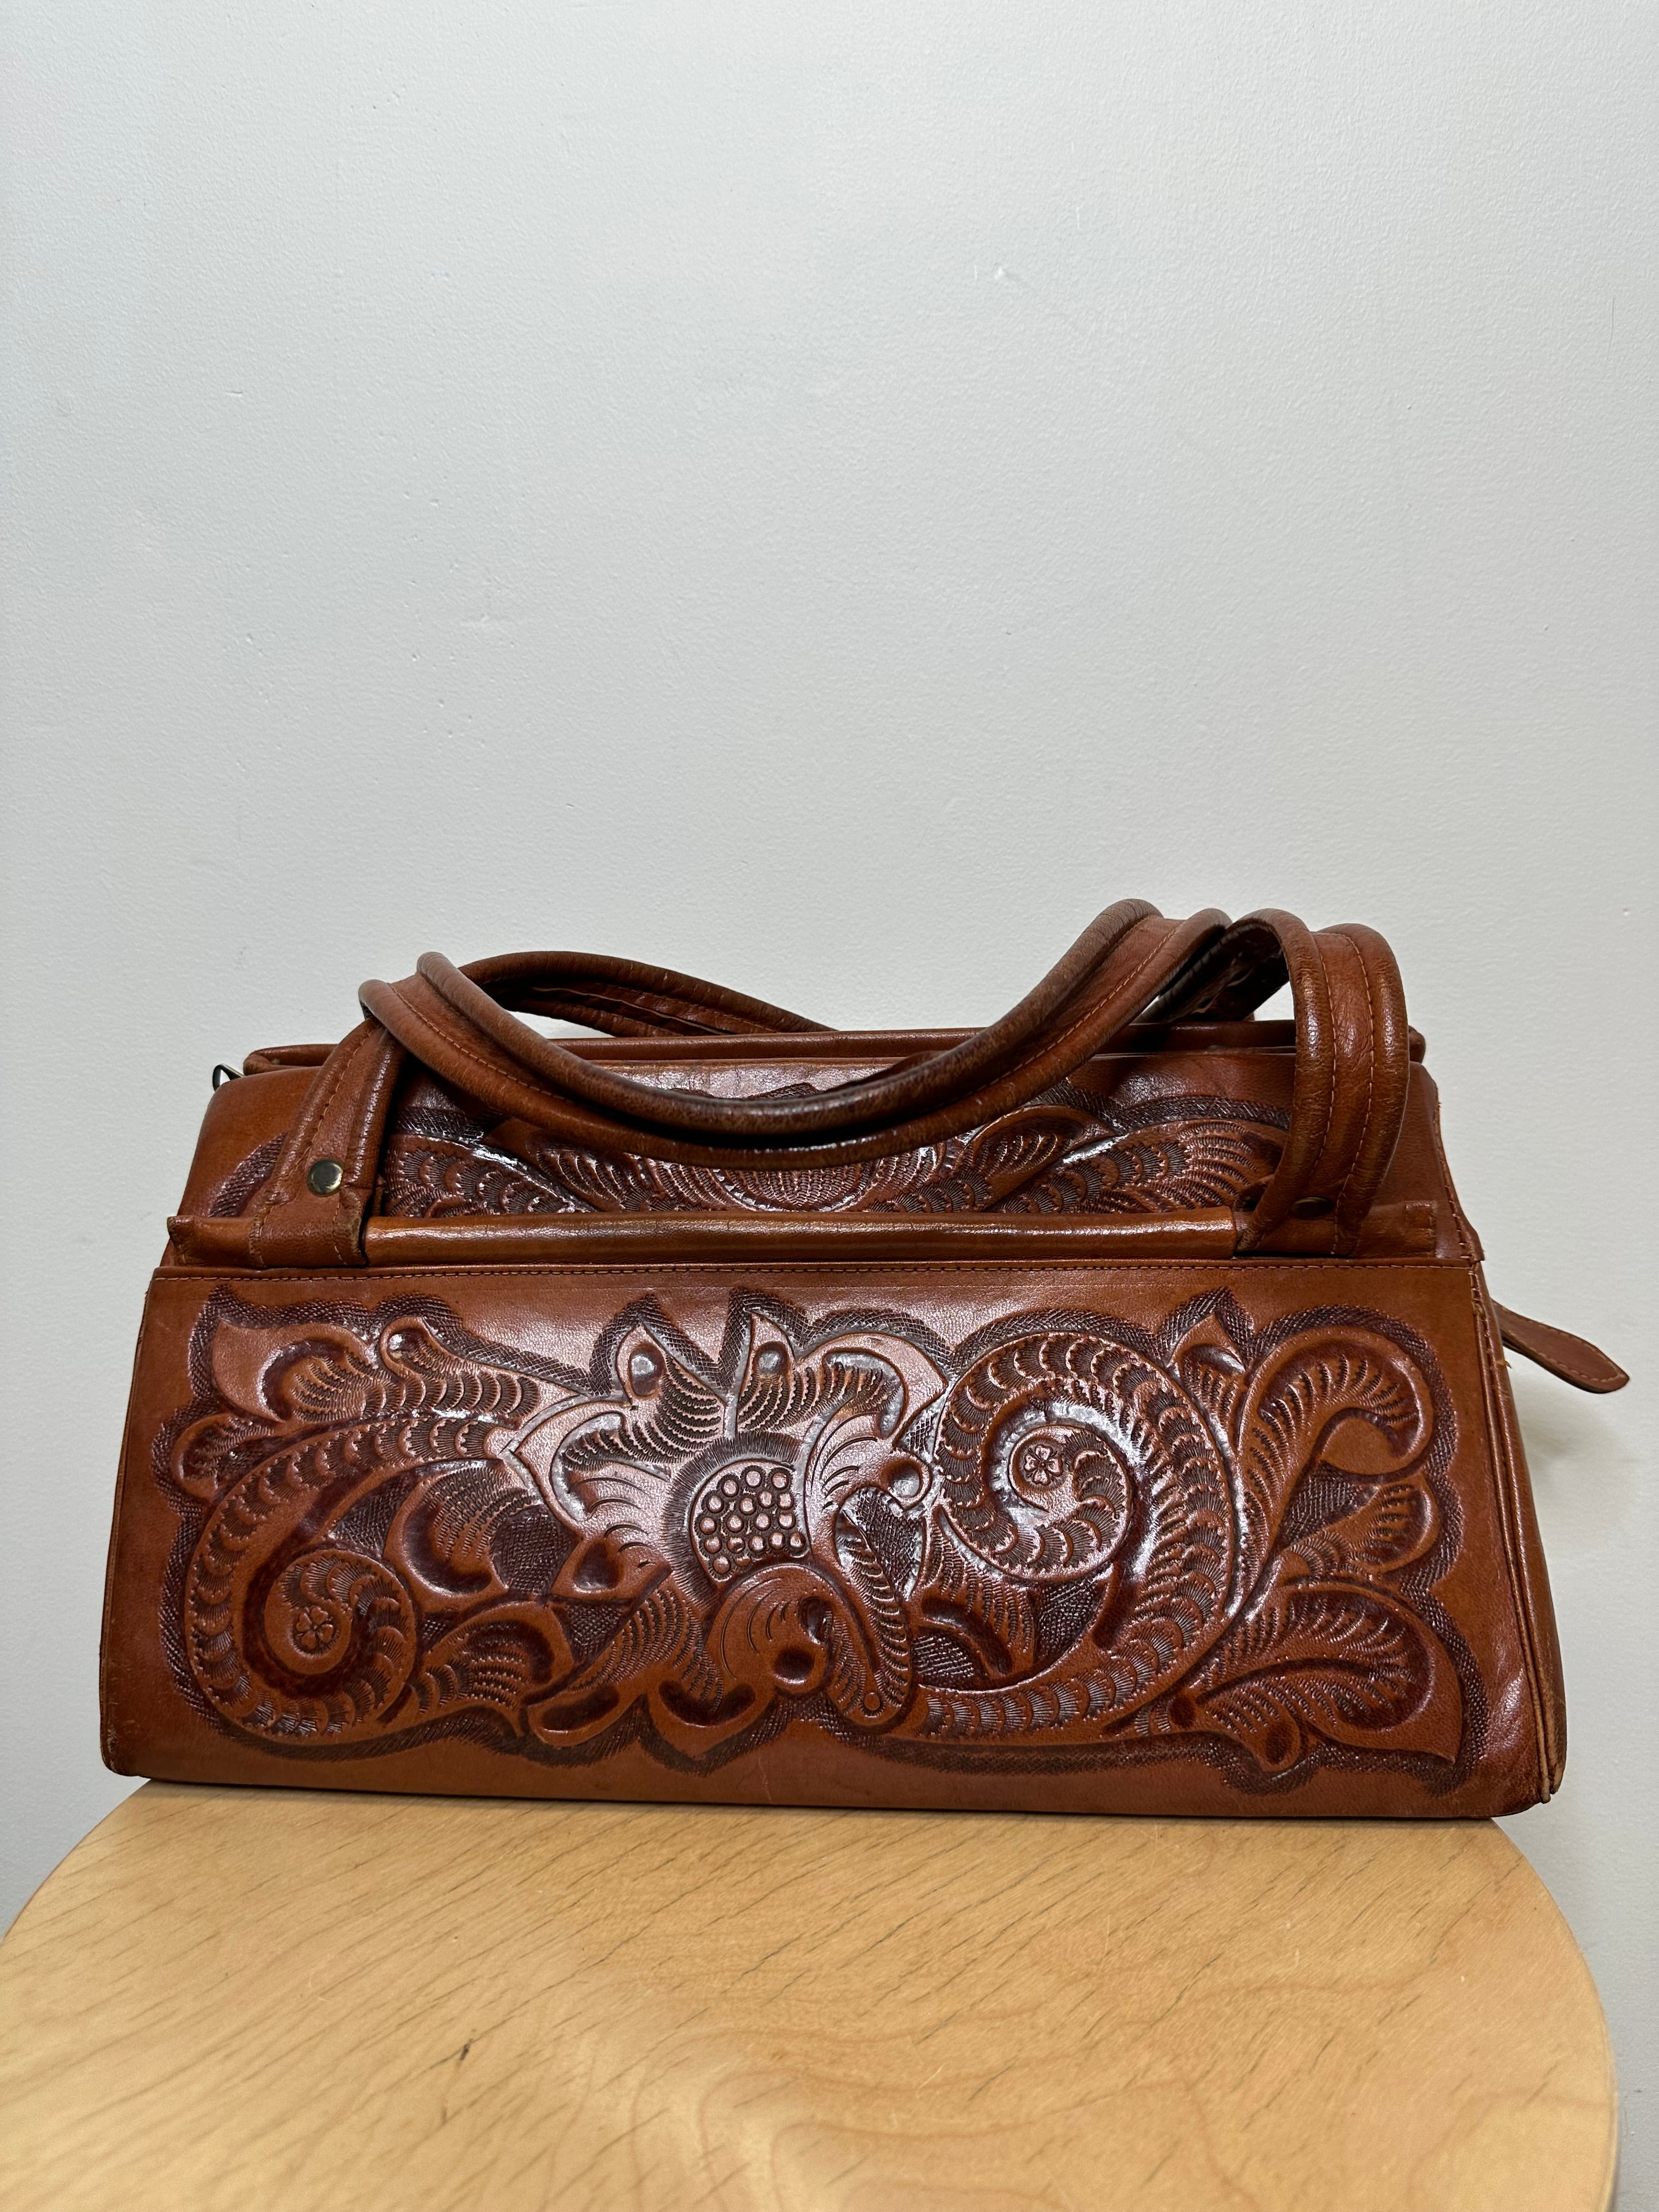 Vintage Brown Tooled Leather Purse - AS IS